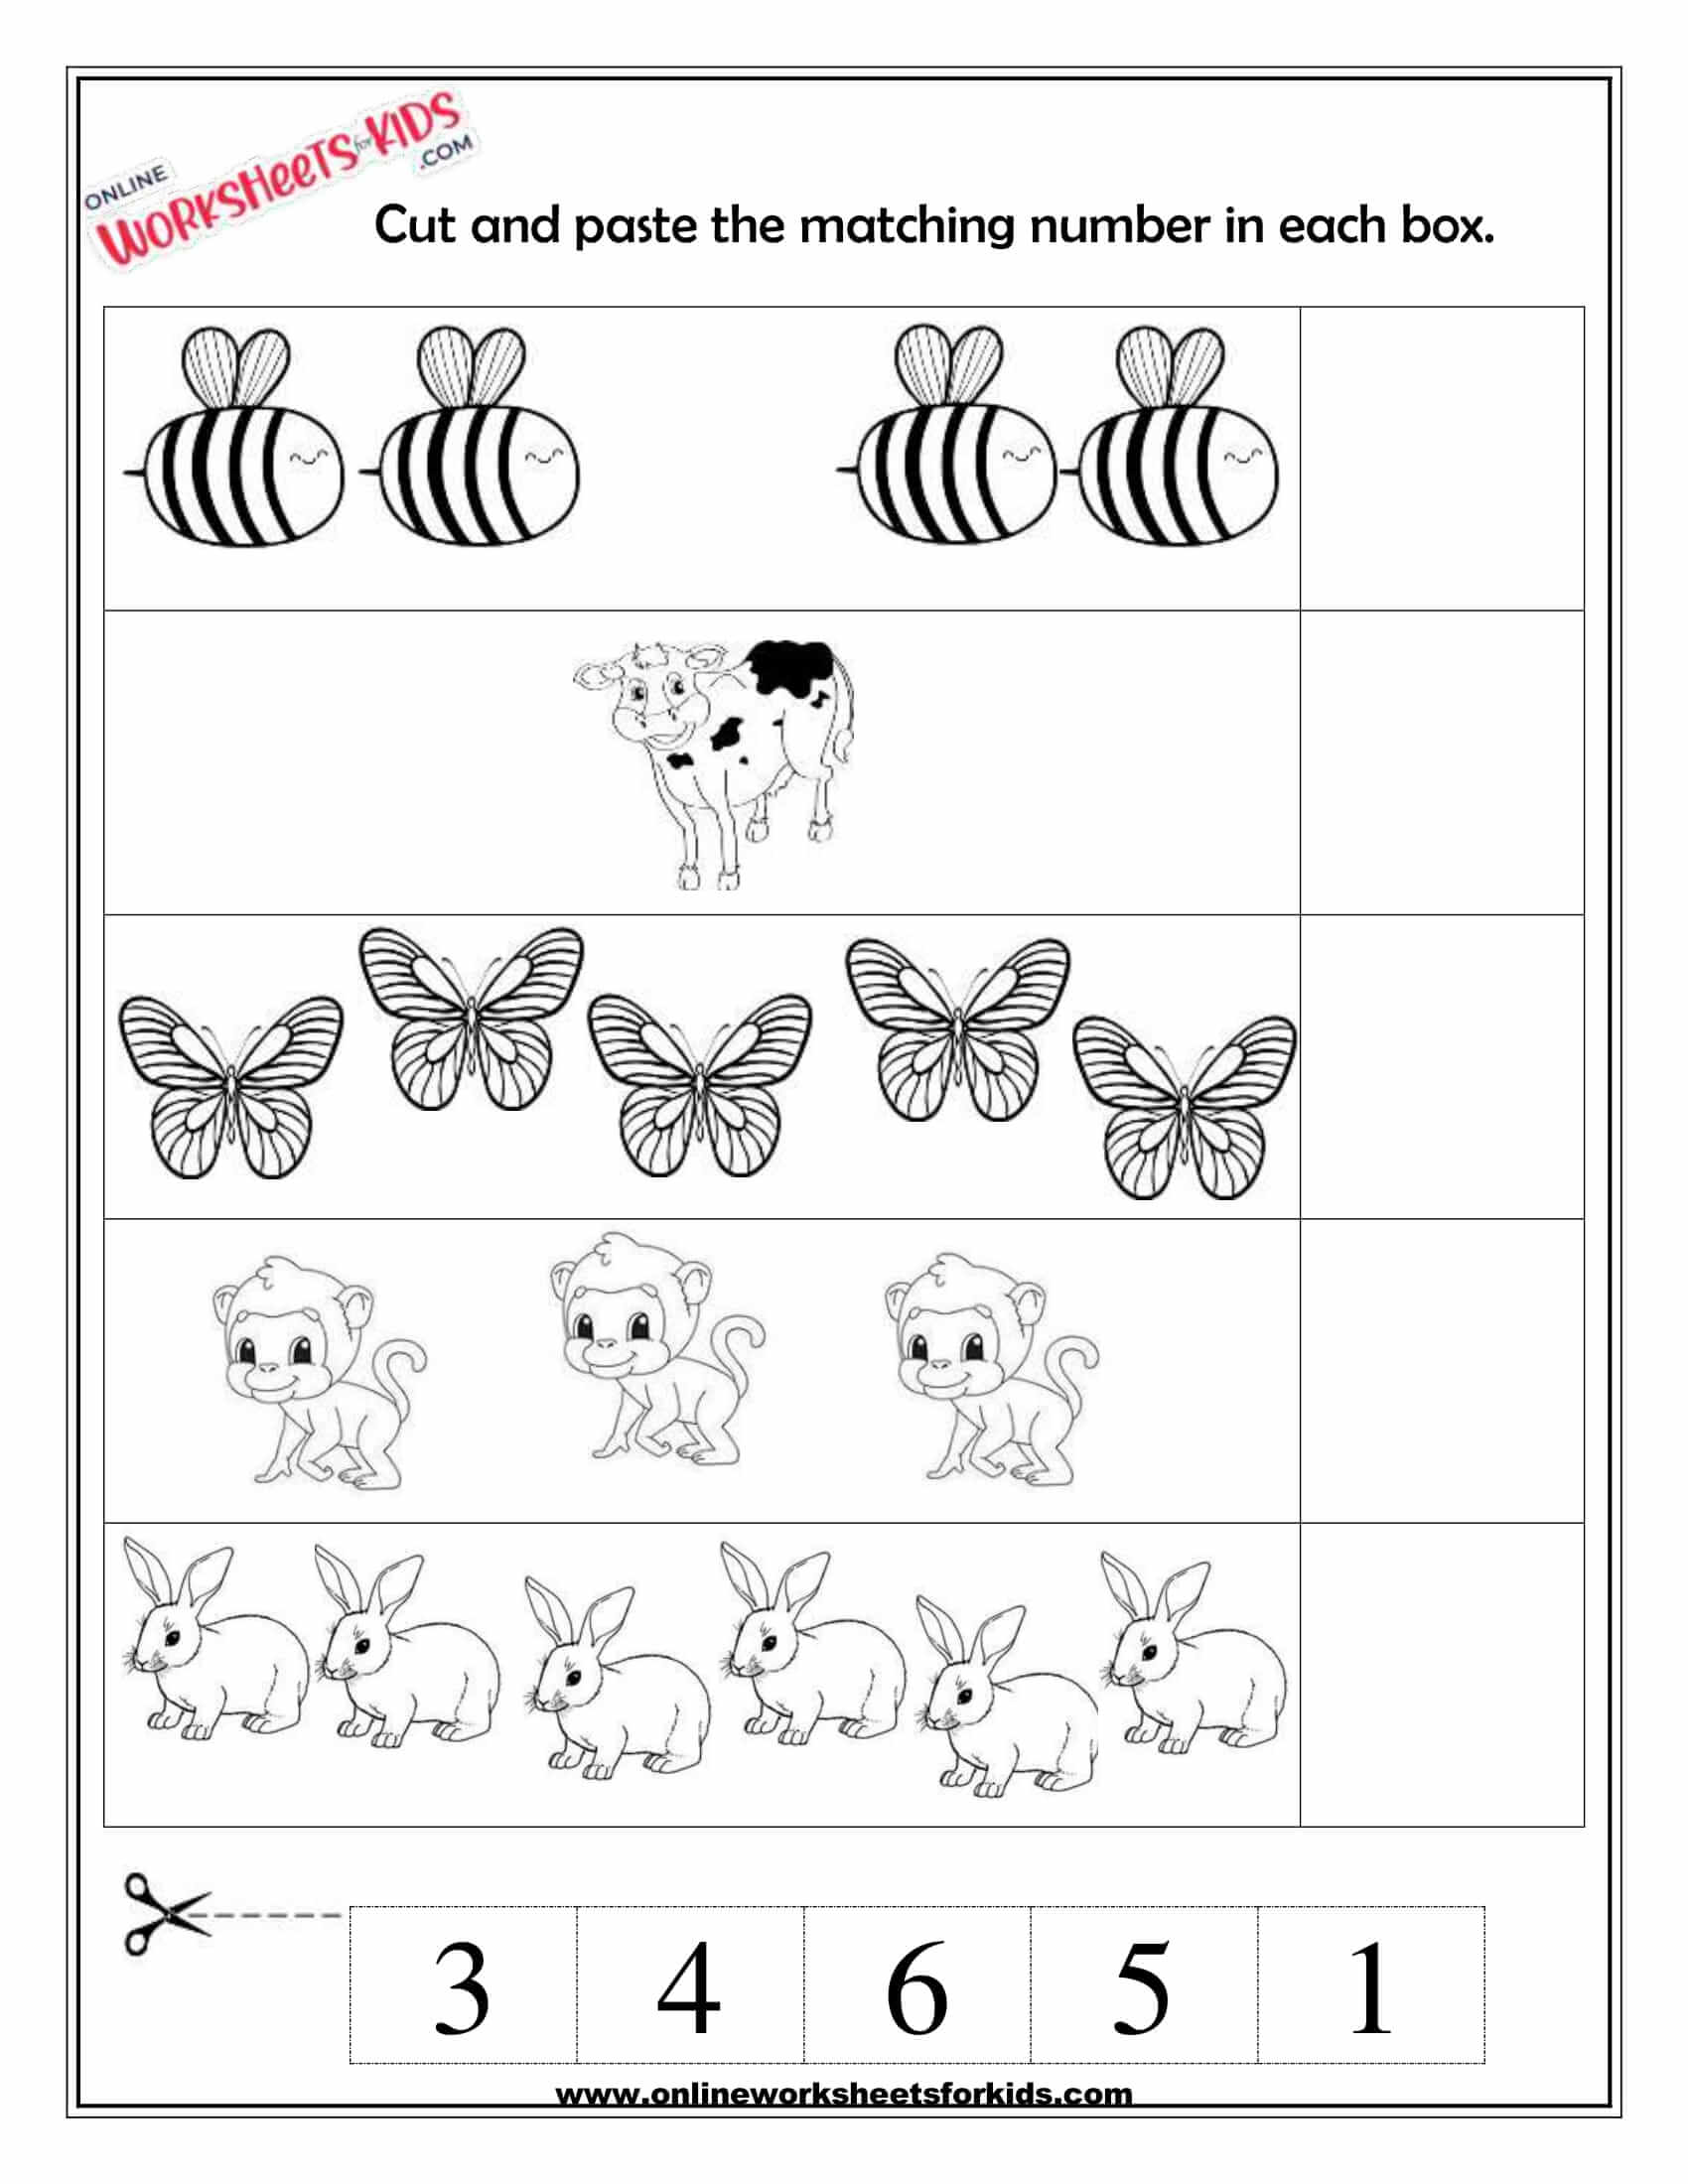 cut-and-paste-alphabet-worksheets-preschool-learning-etsy-canada